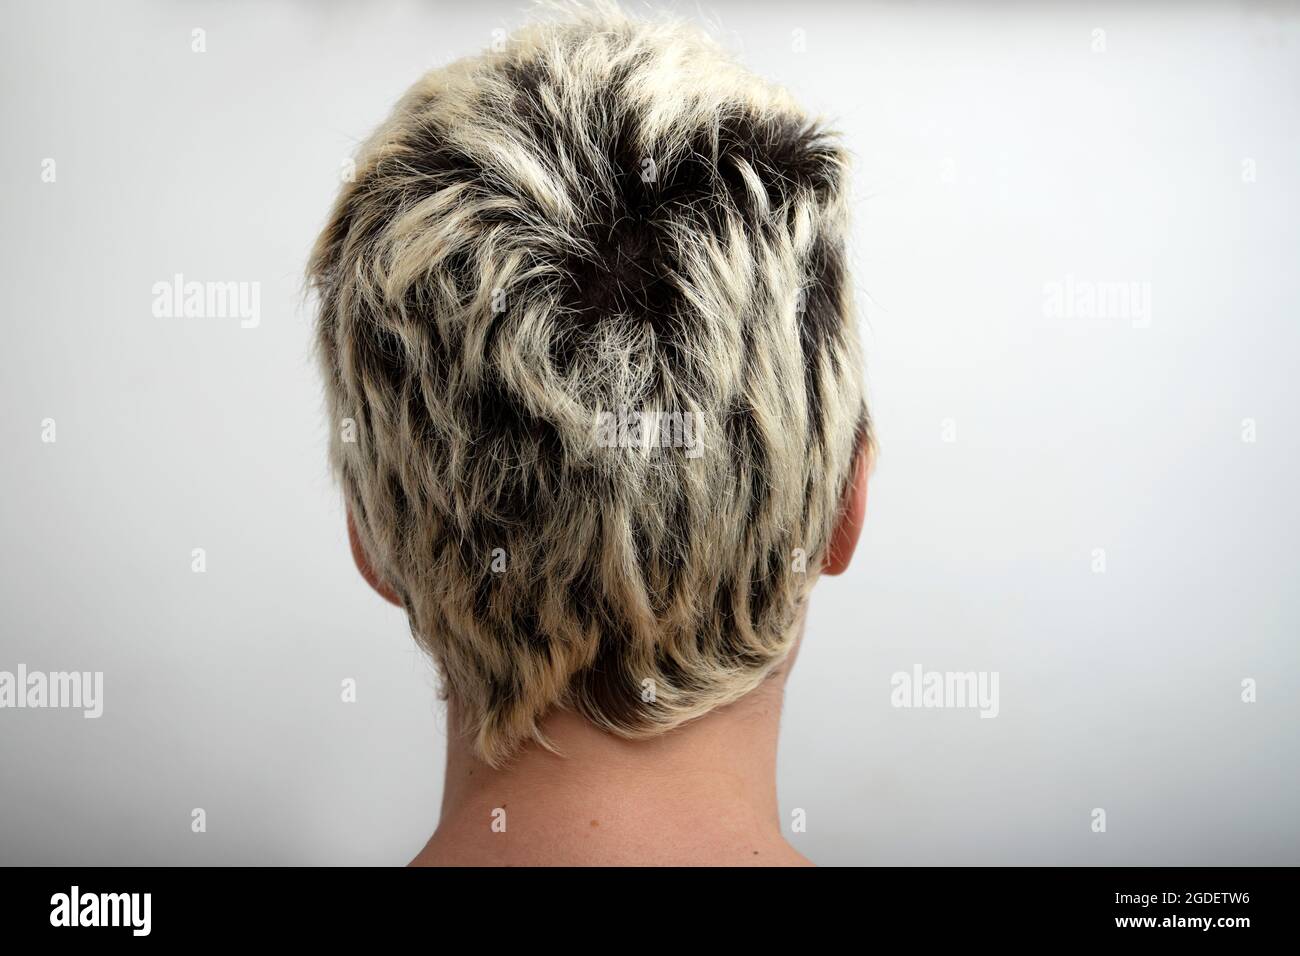 person's head from behind with short hair and bleached tips Stock Photo -  Alamy